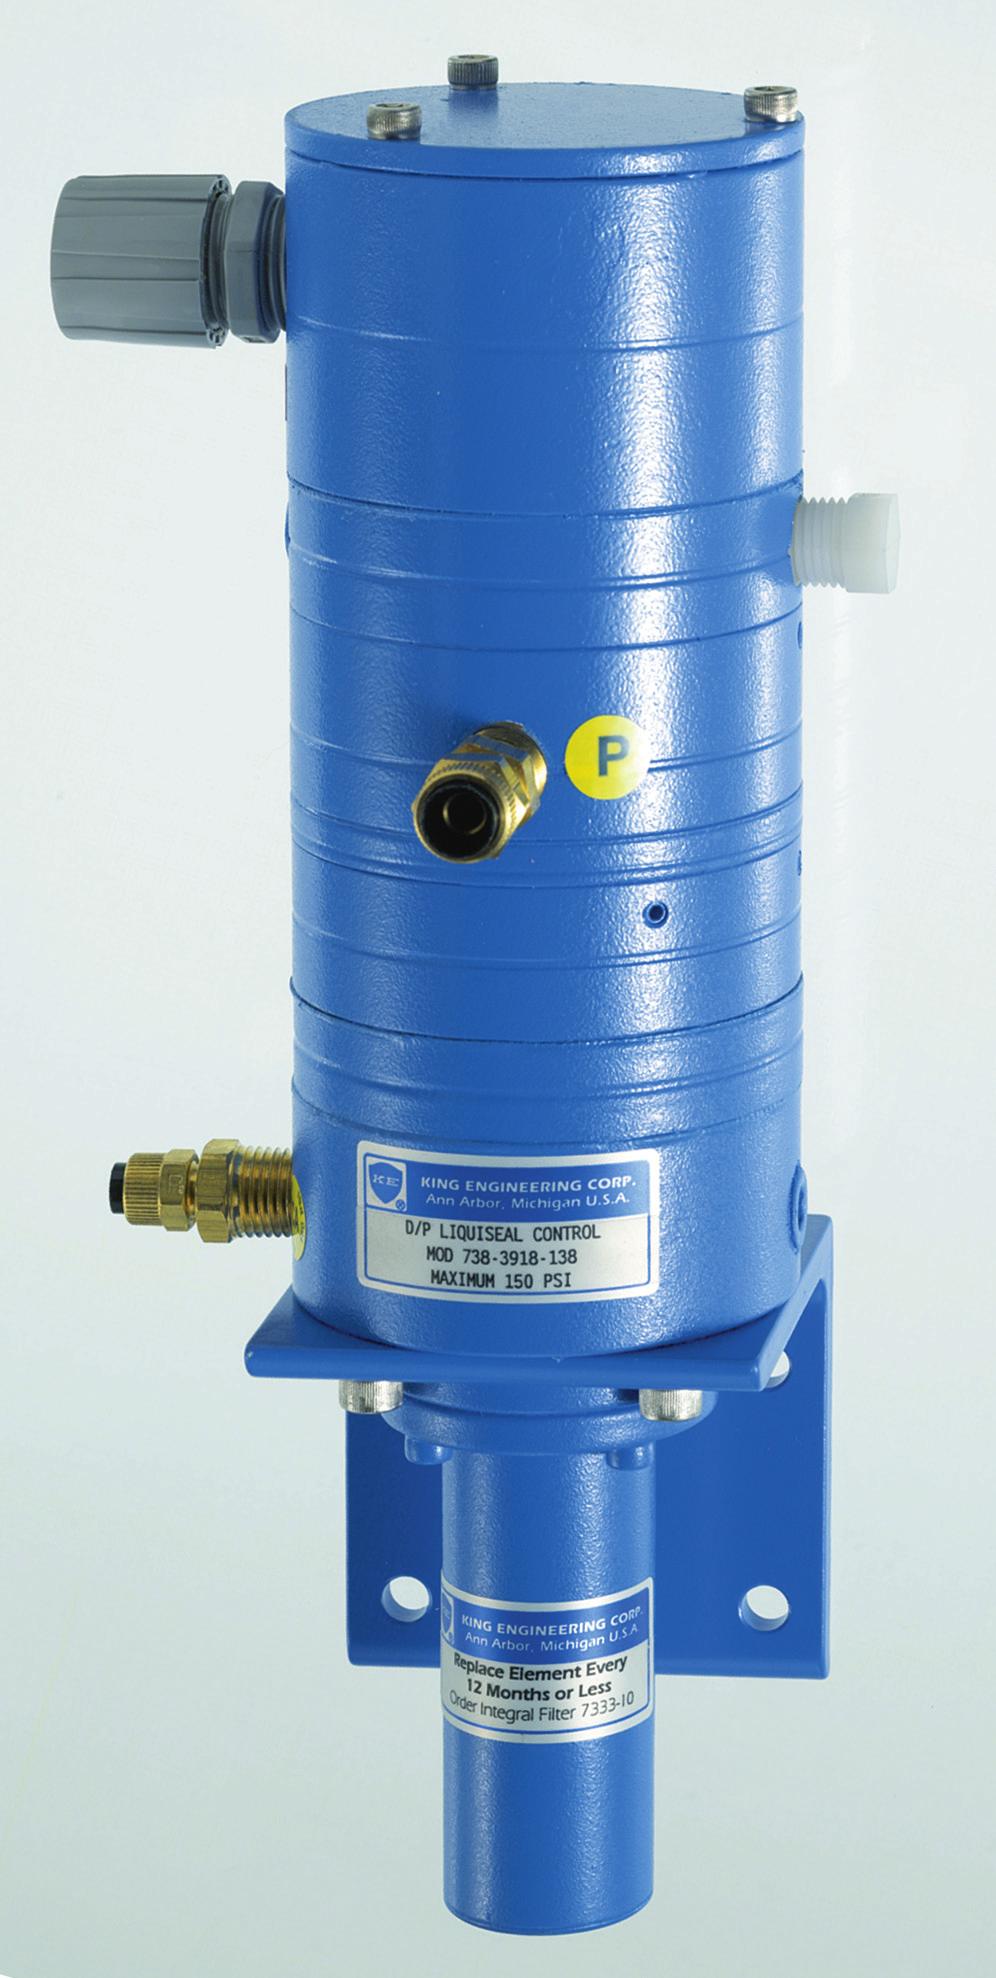 Effective: June 2010 KING-GAGE D/P LiquiSeal Purge Control and D/P Purge Control